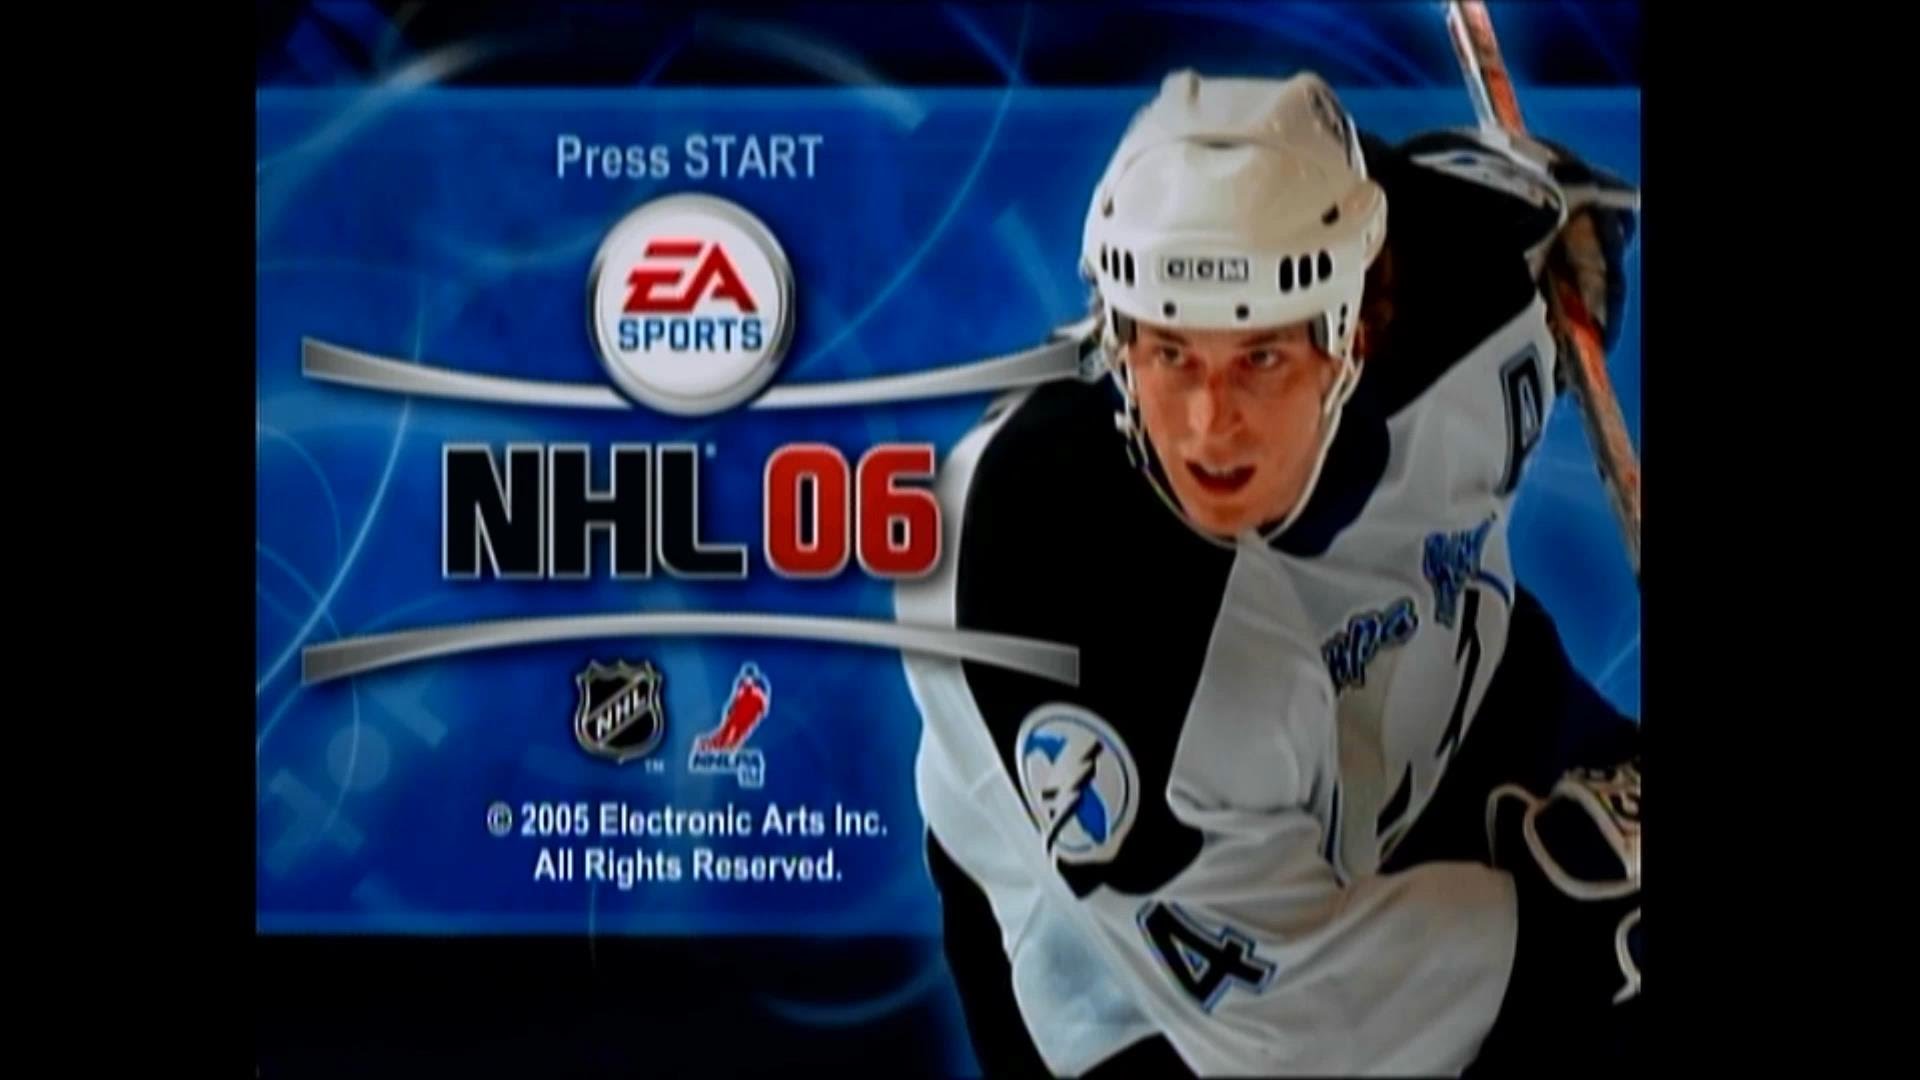 Nice Images Collection: NHL 06 Desktop Wallpapers